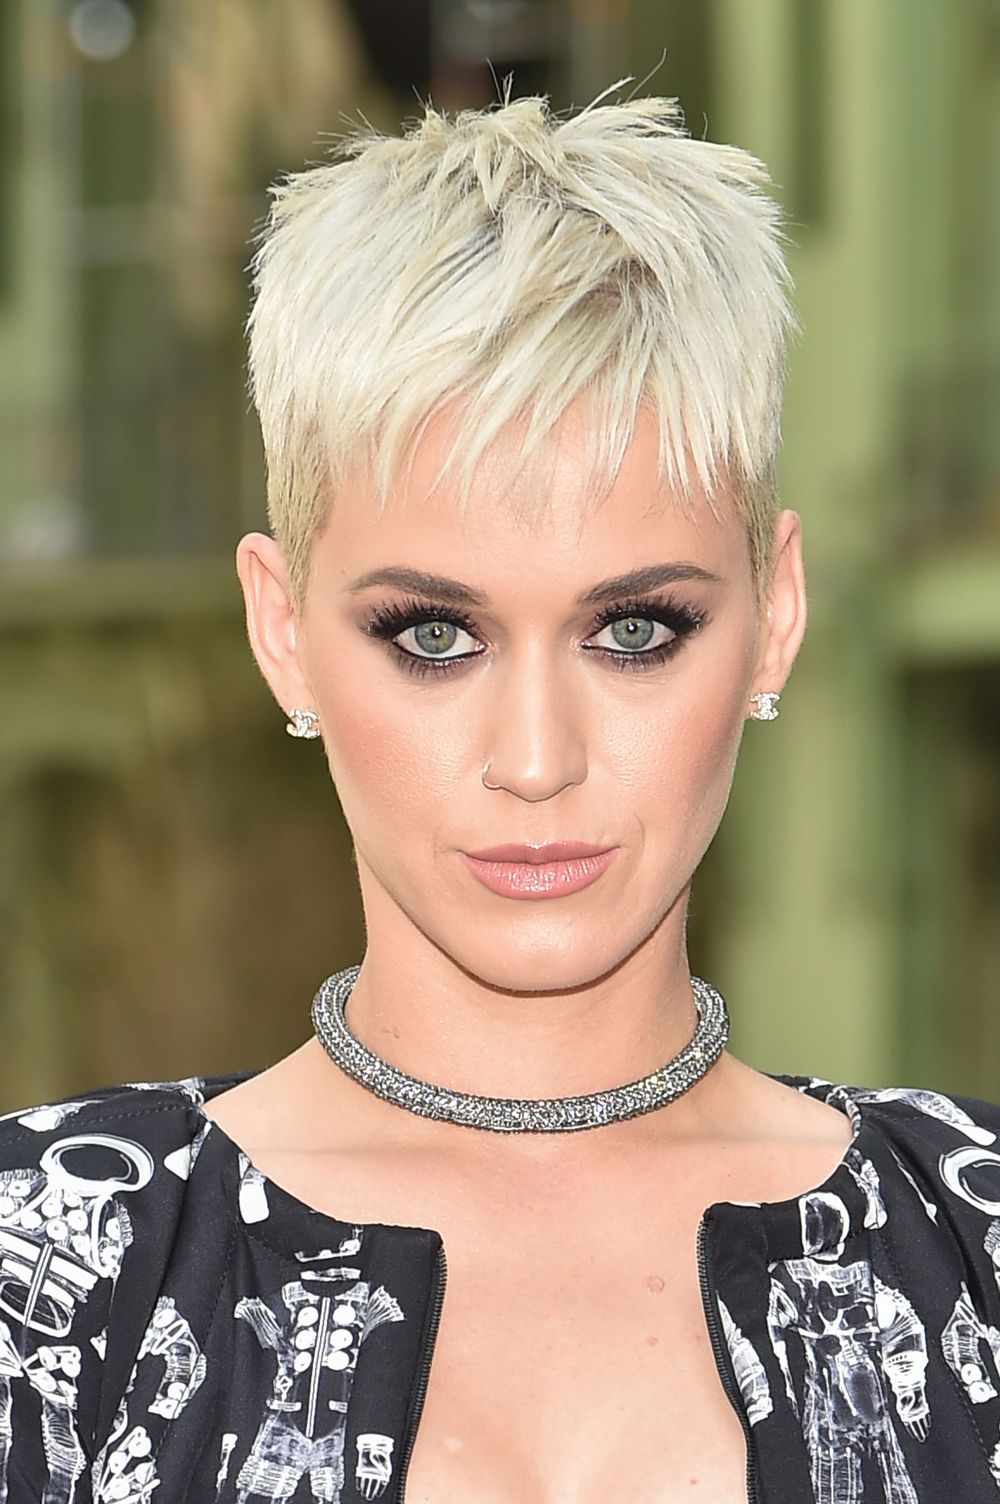 Best Celebrity Hairstyles - Katy Perry Haircut